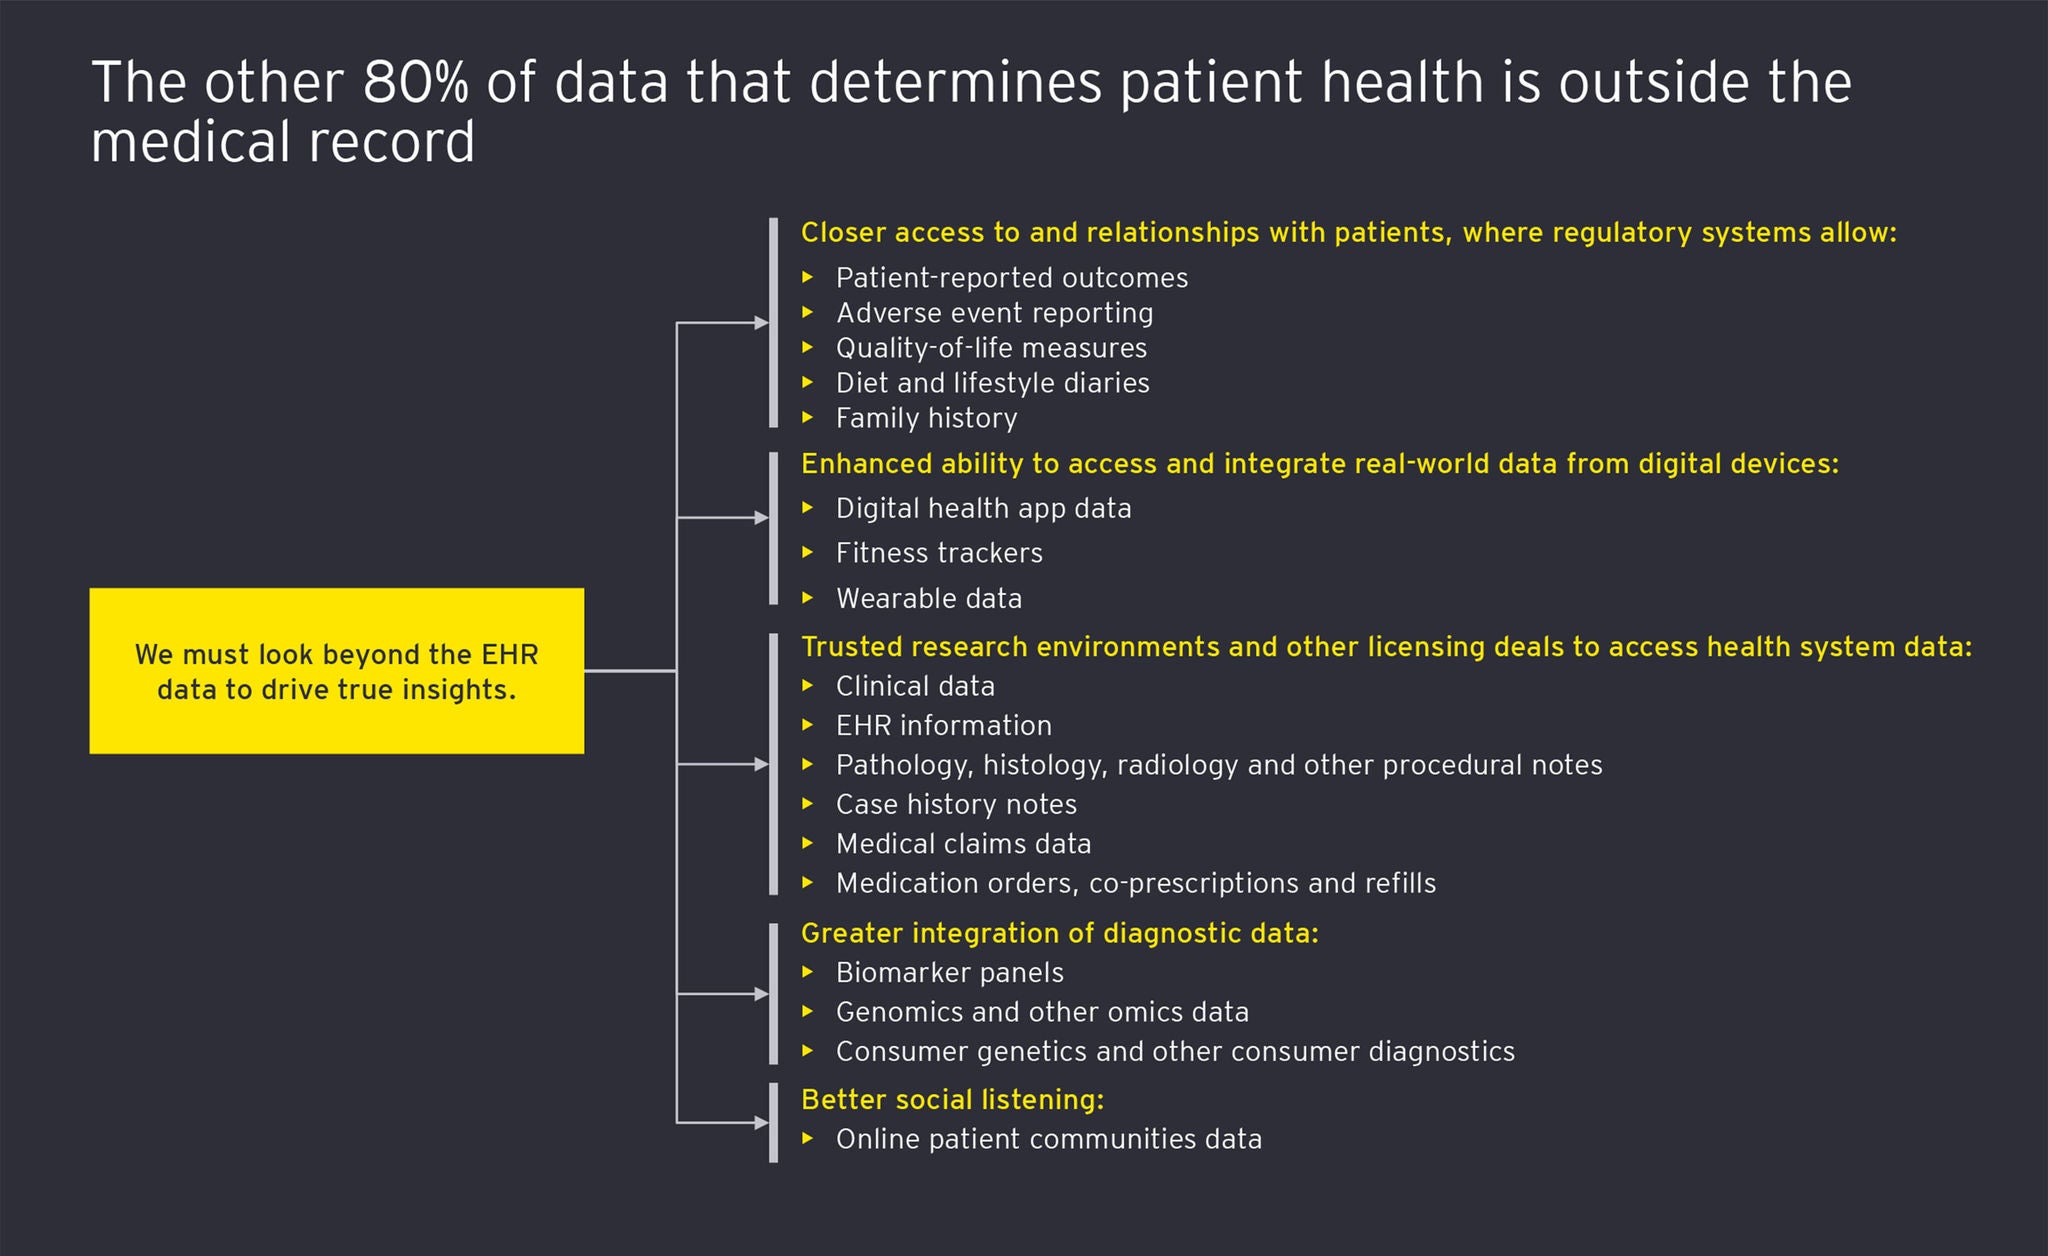 the-other-80%-of-data-that-determines-the-patient-health